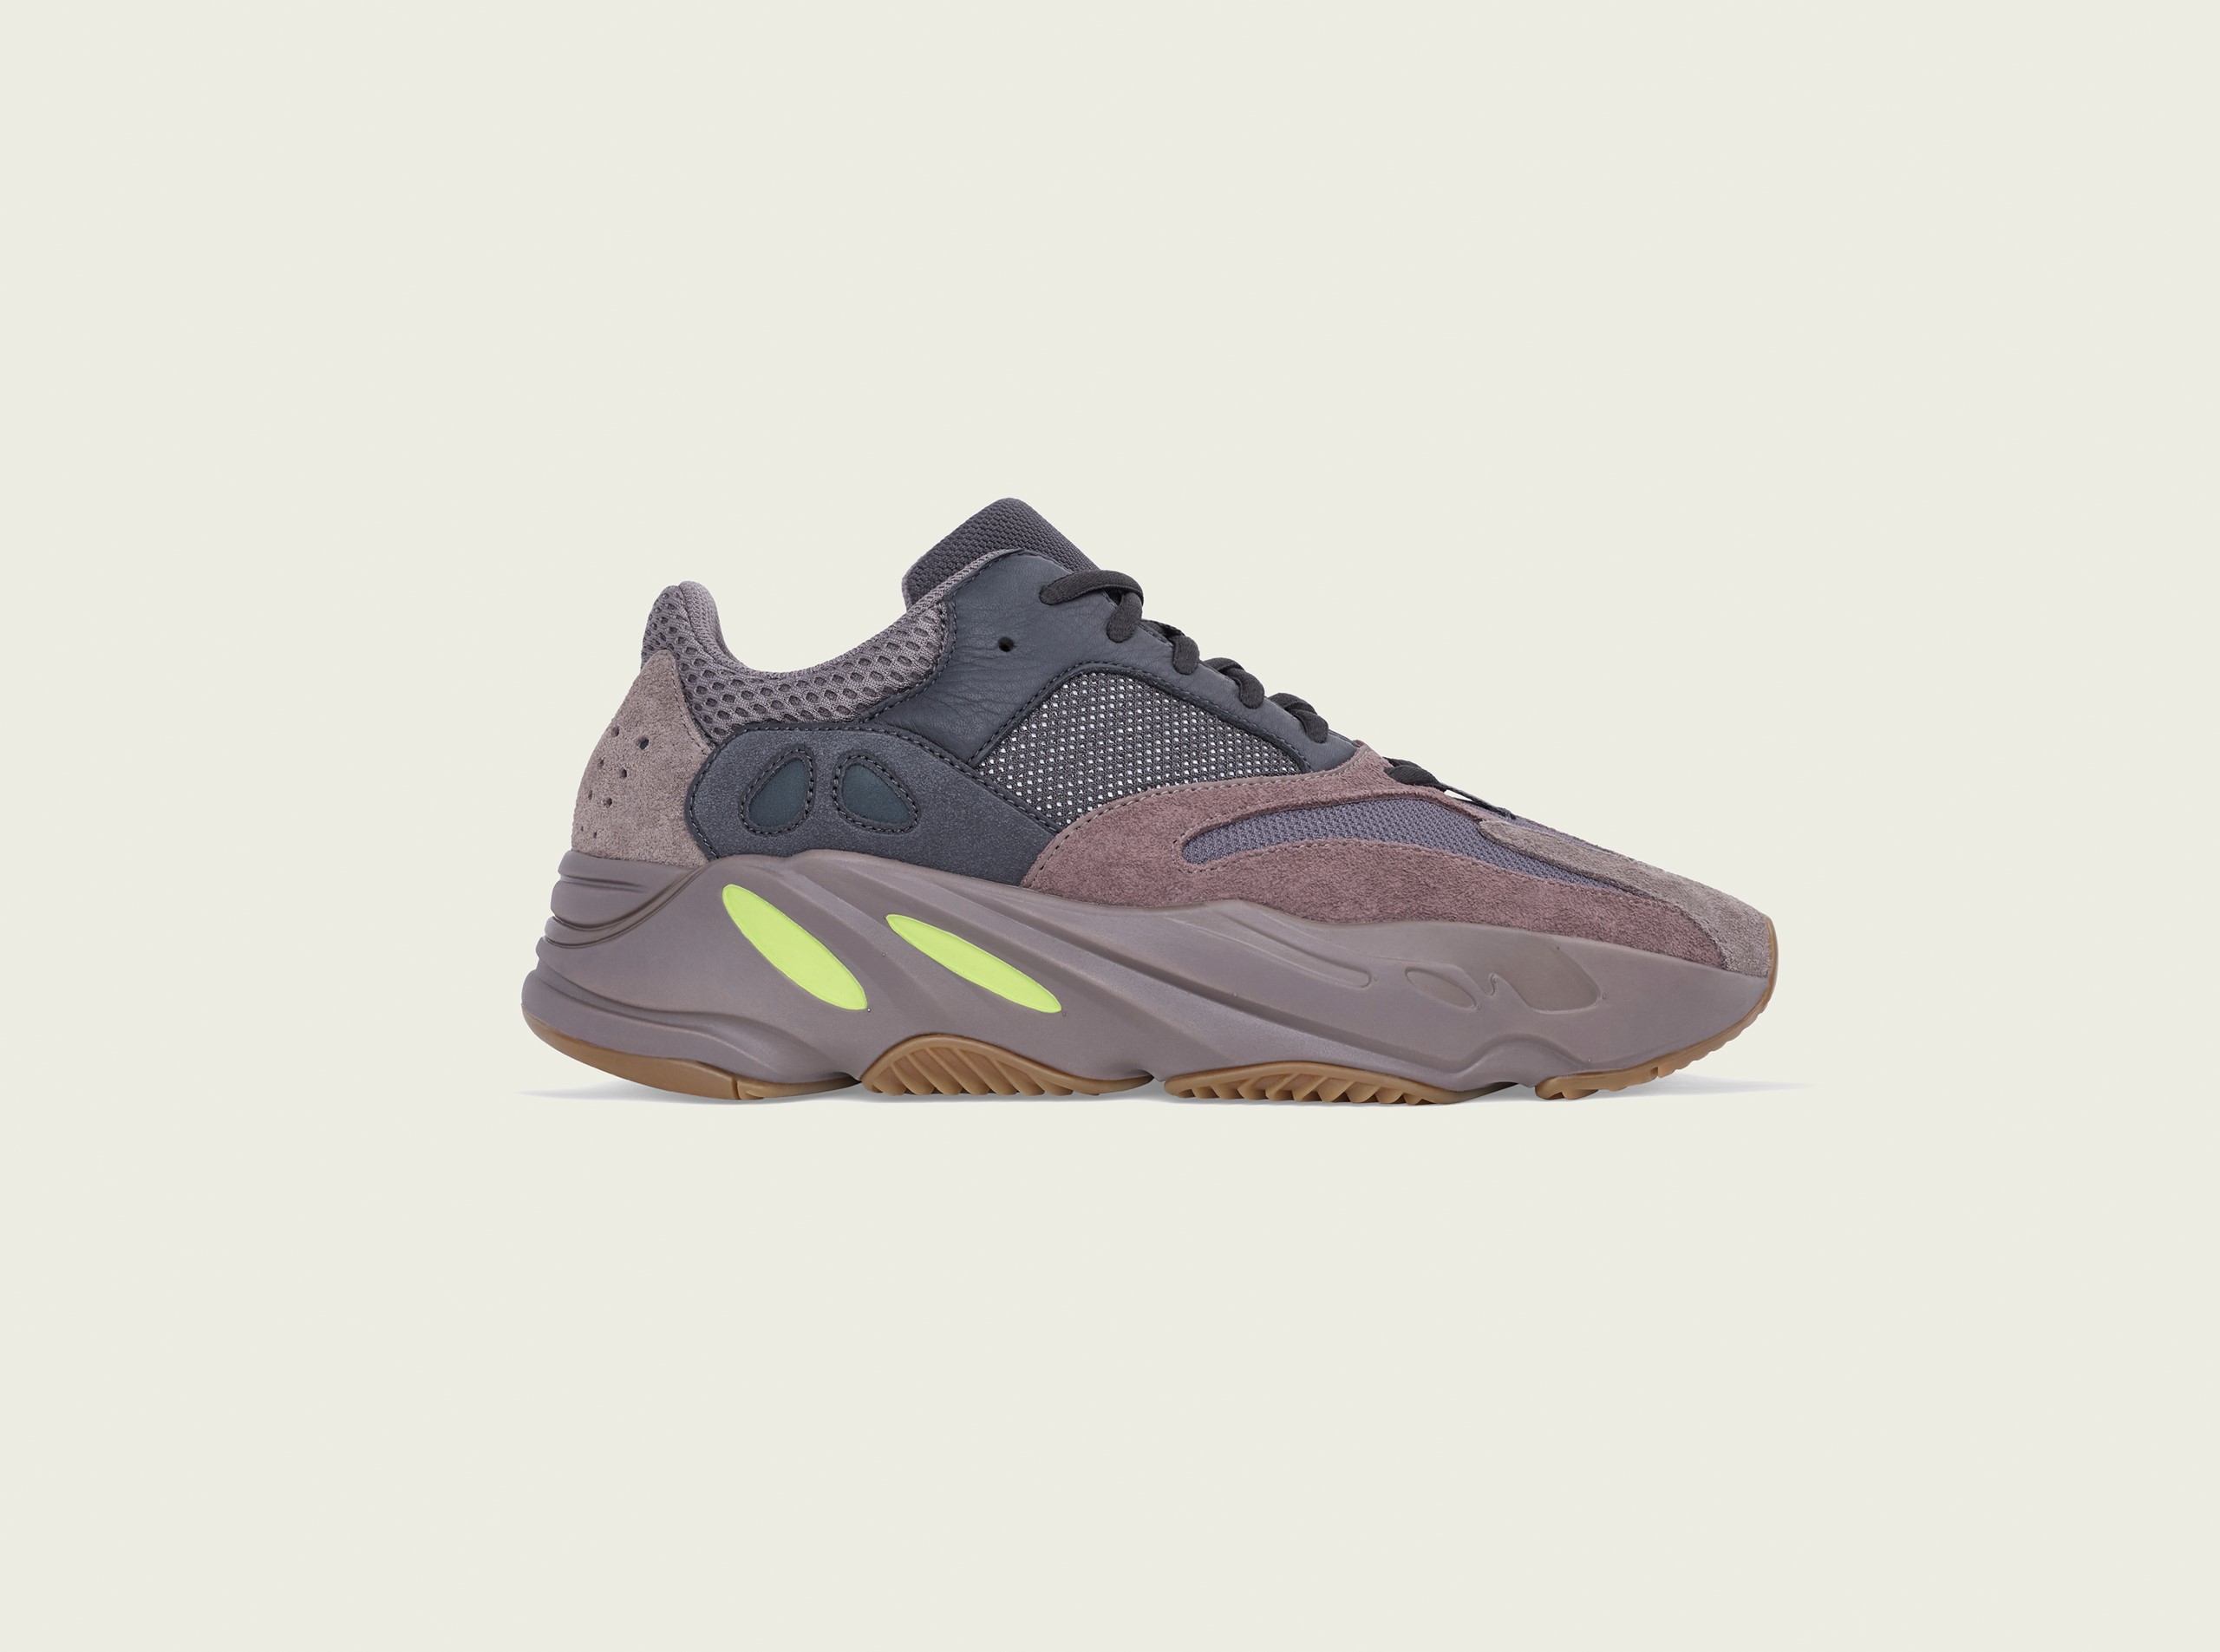 Pastries Graduation album spell adidas News Site | Press Resources for all Brands, Sports and Innovations :  YEEZY